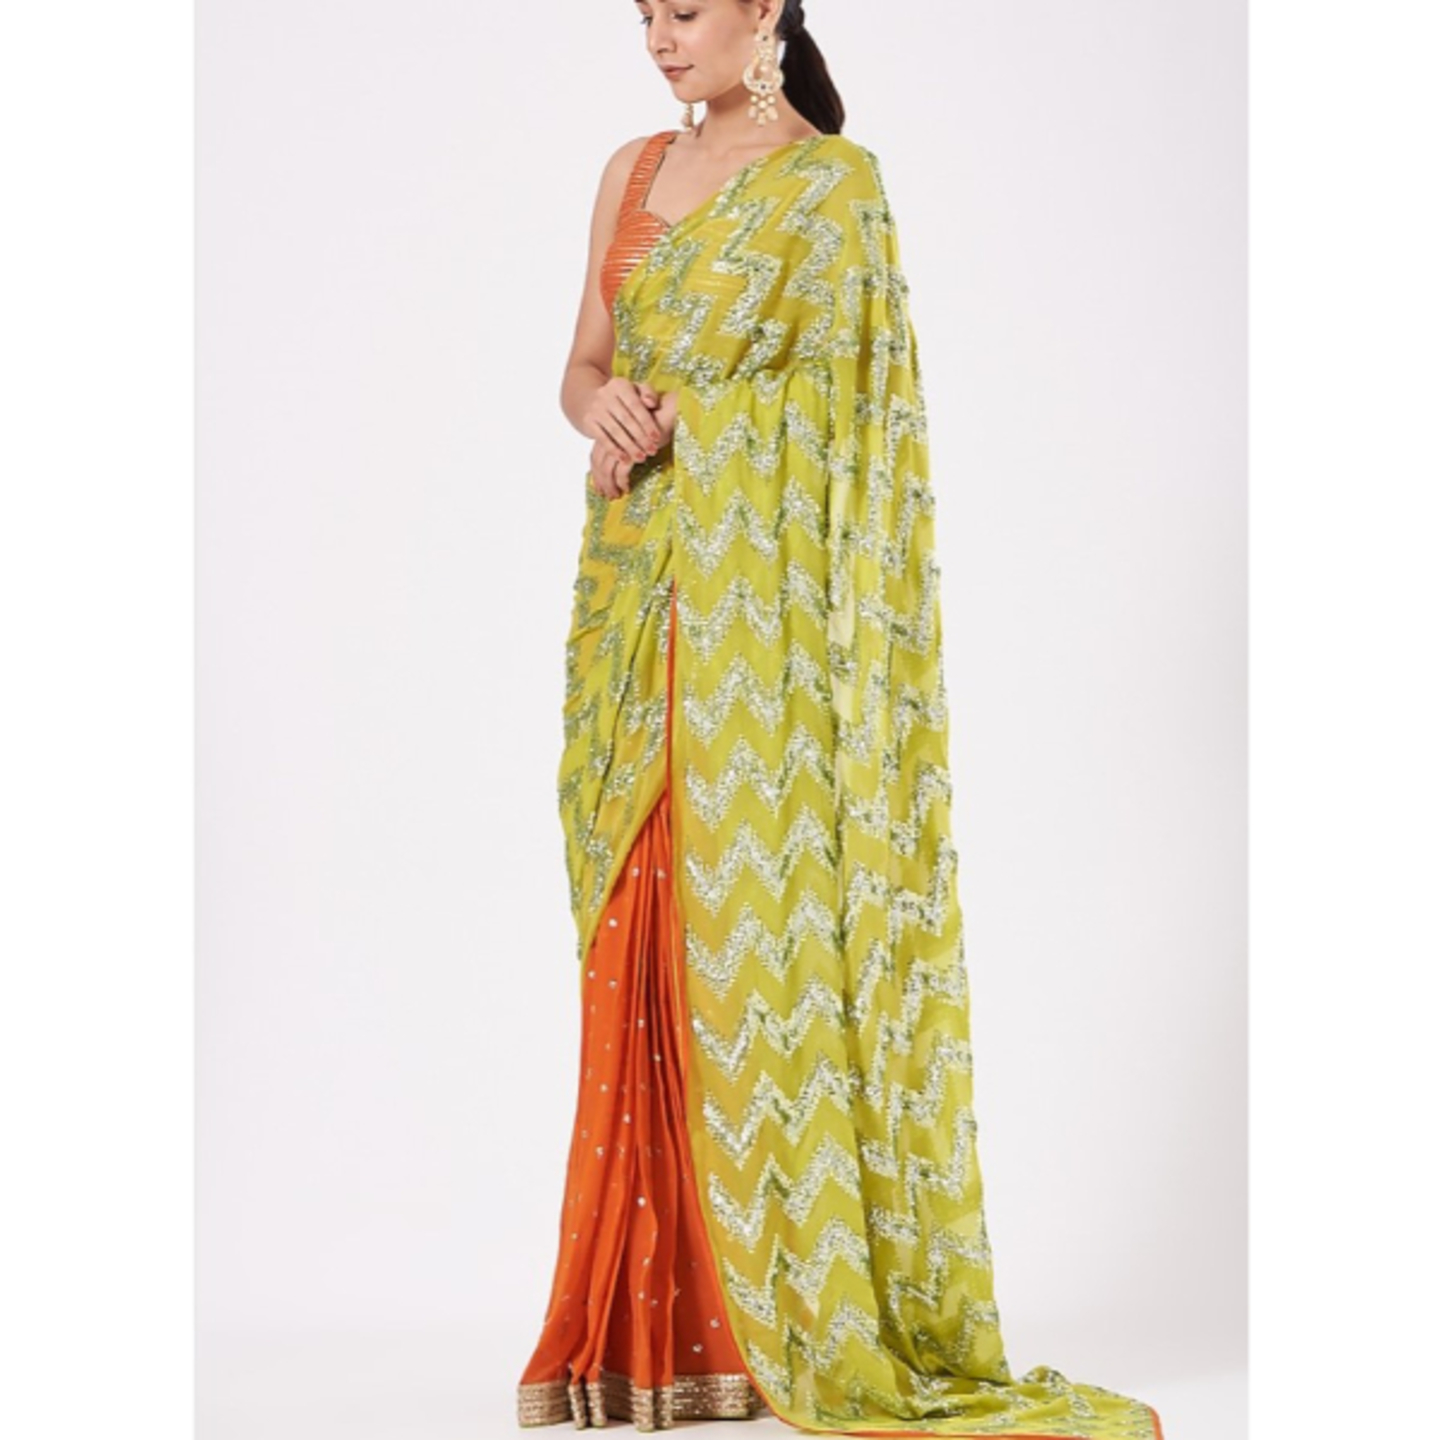 SASSY PRE PLEATED Colour blocked Georgette saree in Lime-green and Orange colours.